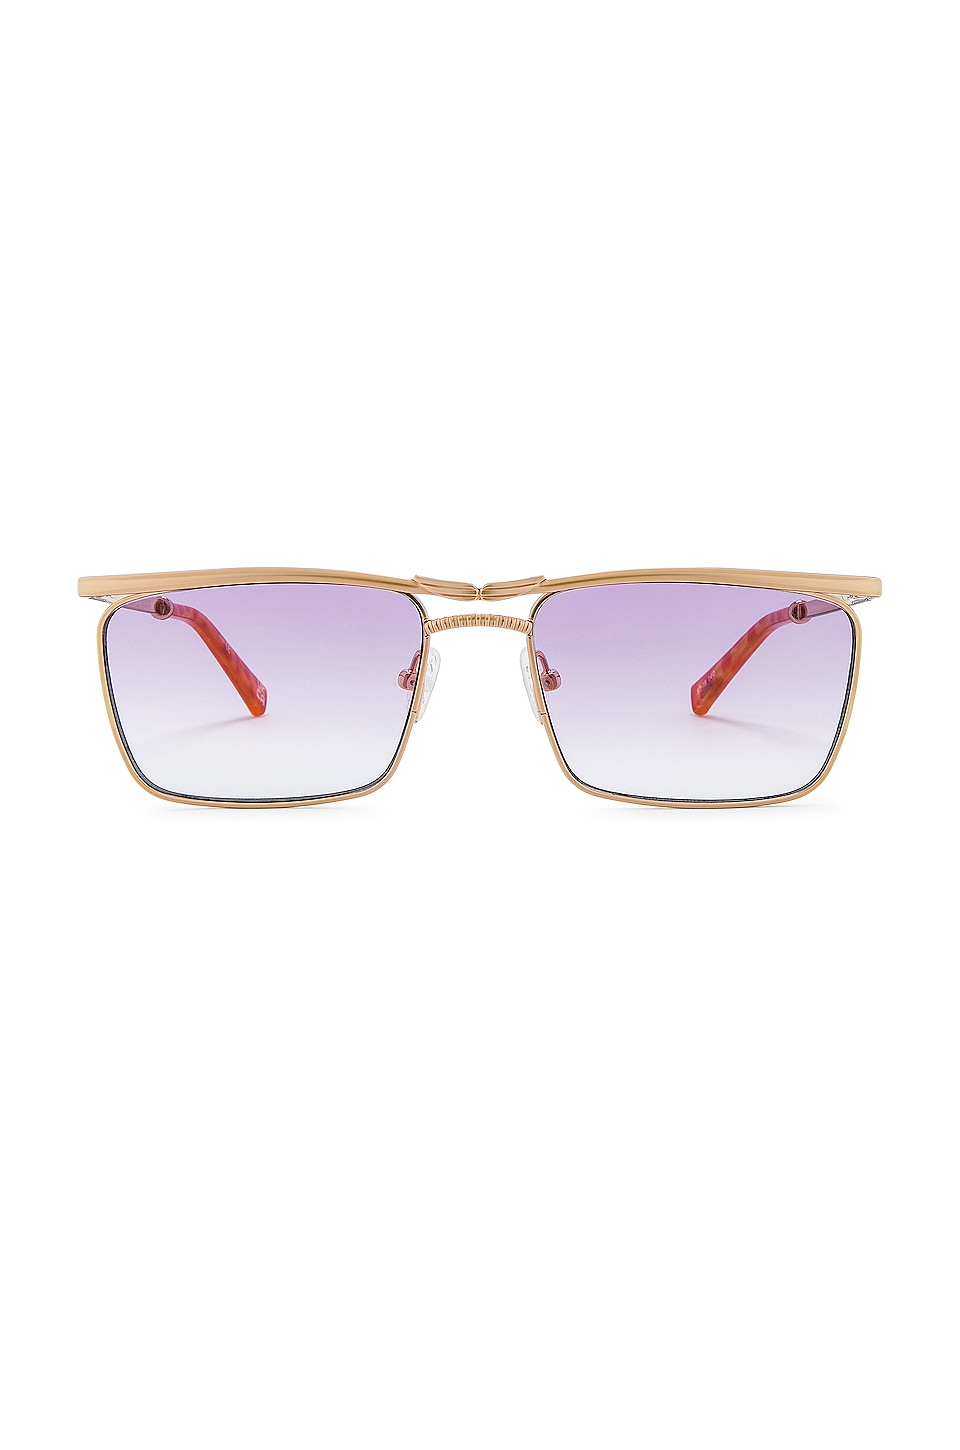 Le Specs That's Hot Rimless Rectangle Bright Gold Frame Pink Gradient